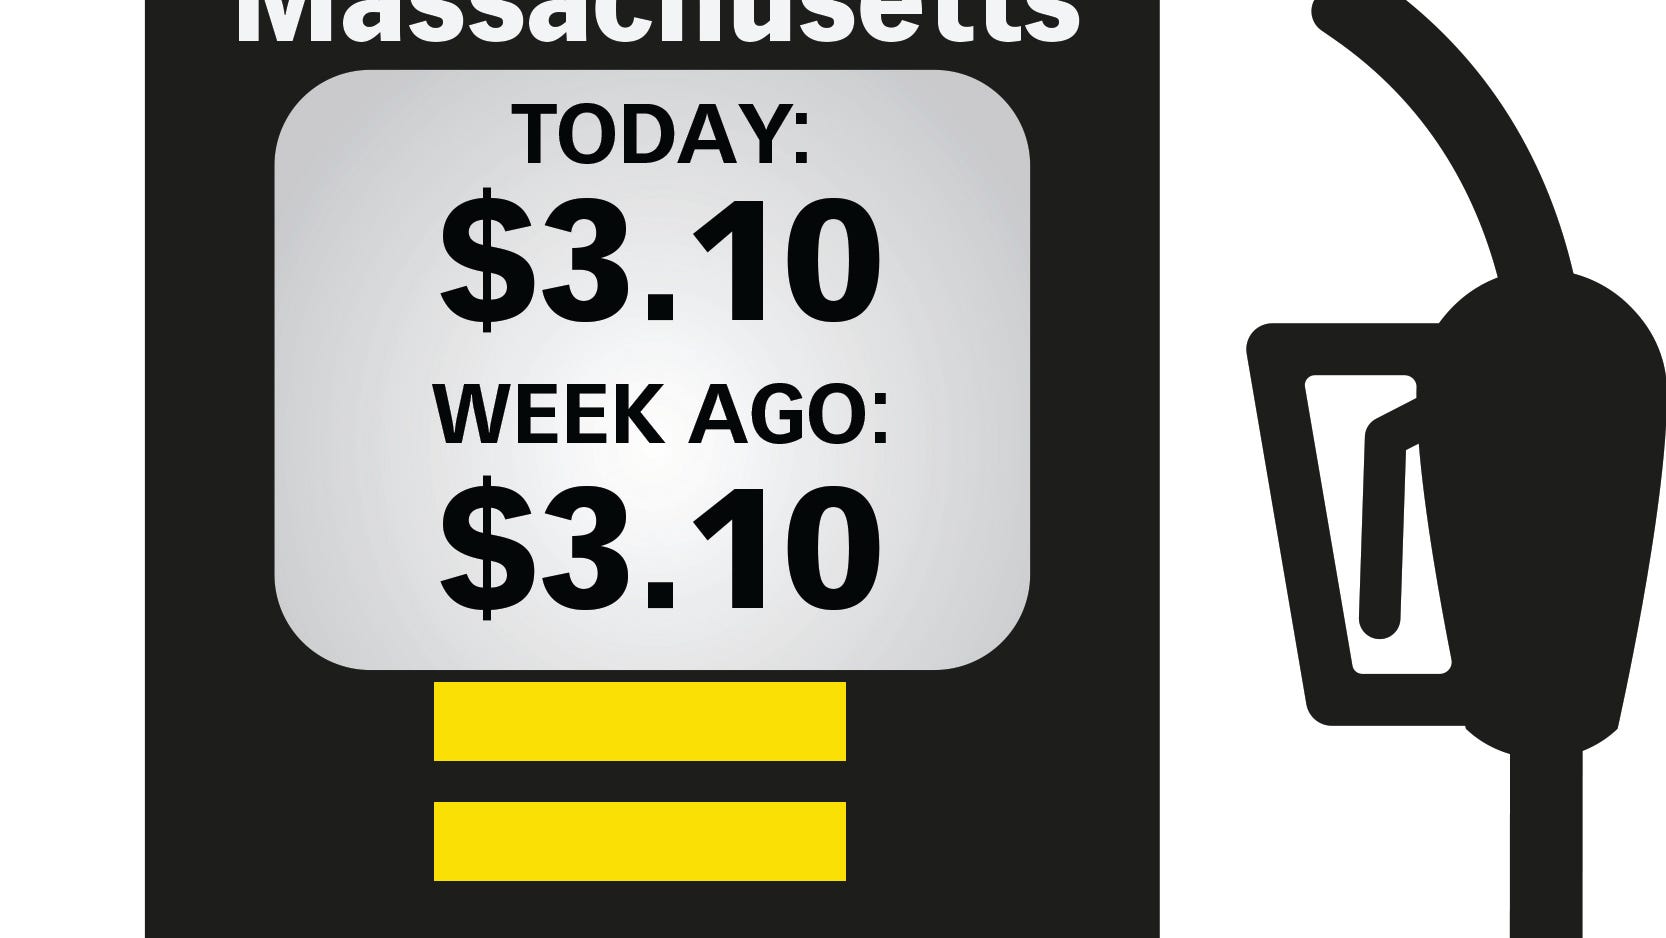 For a third straight week, the average price for Mass. gas is $3.10 per gallon